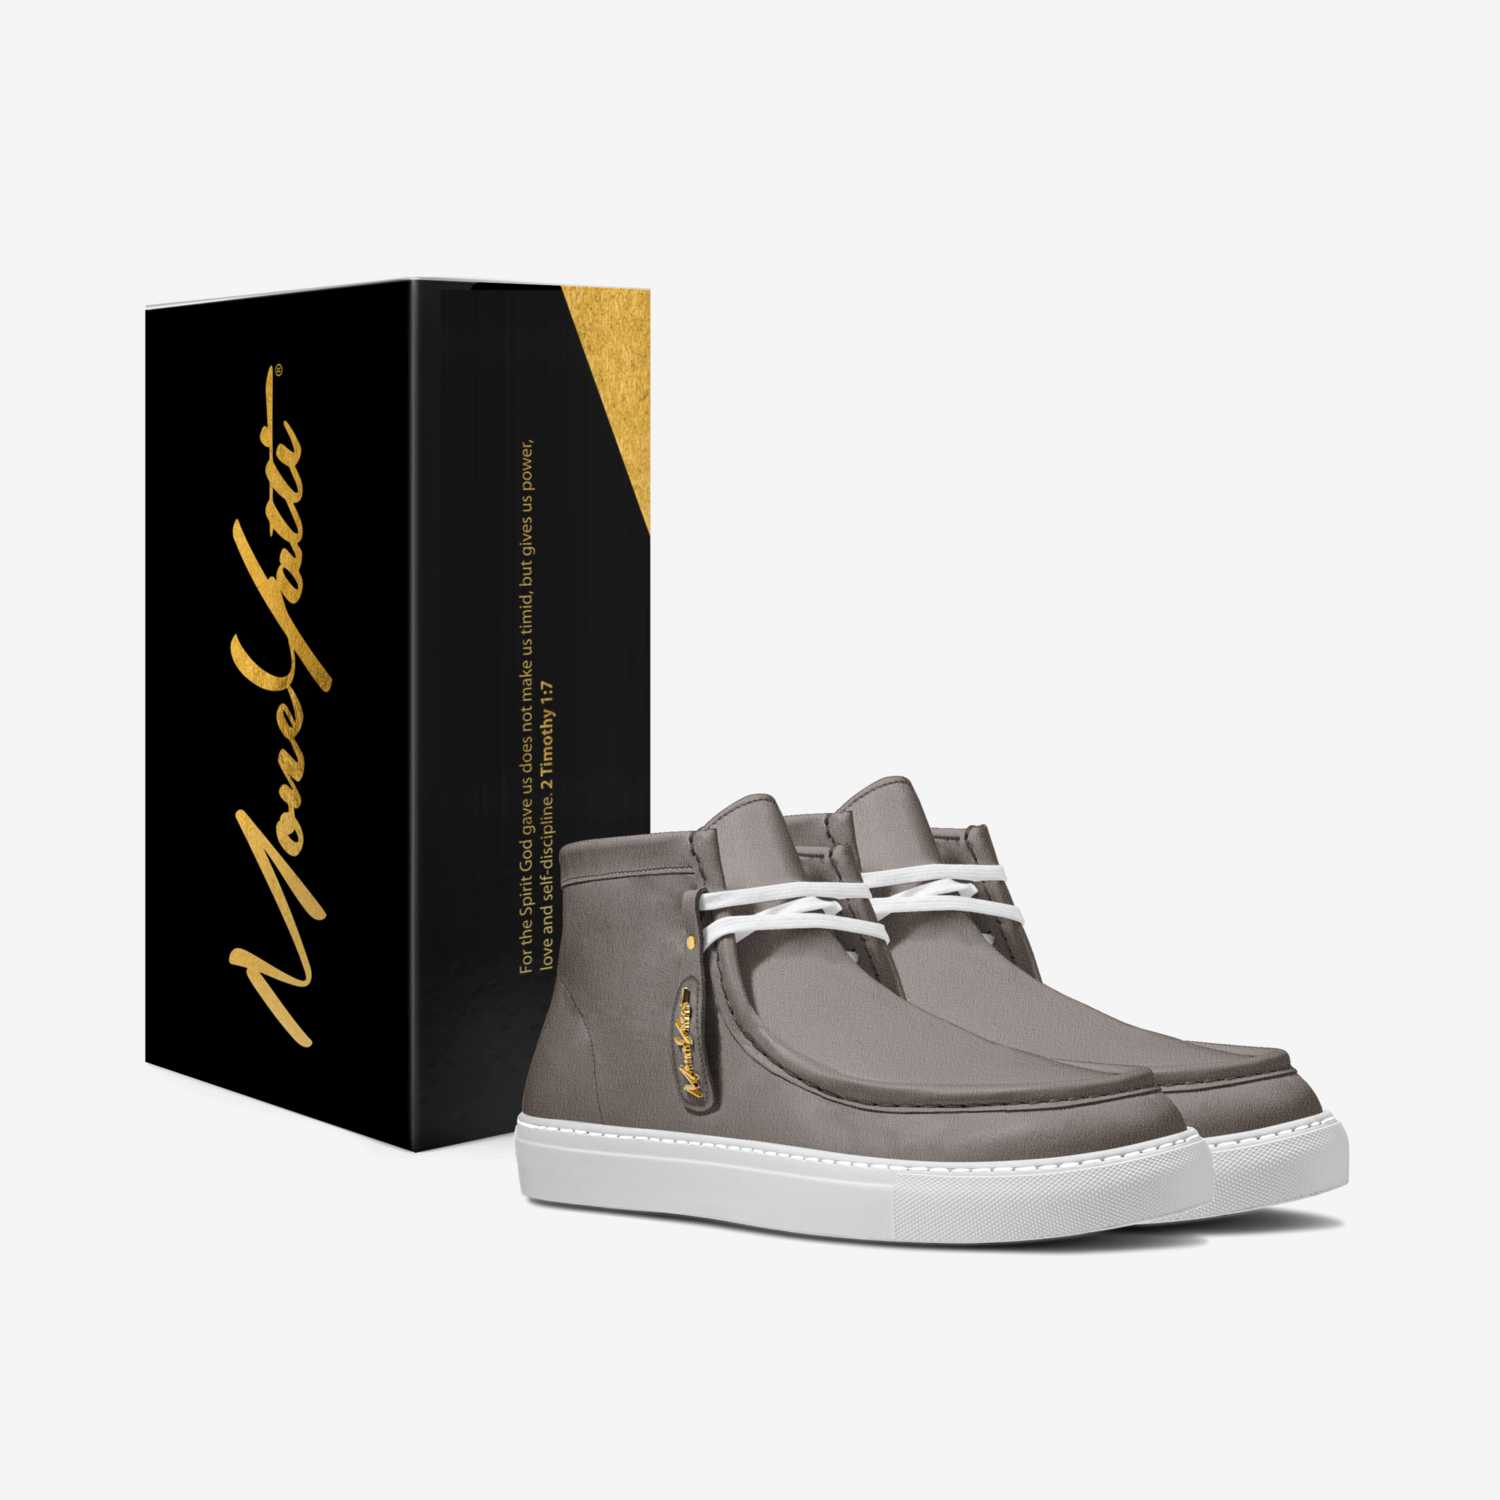 LUX SUEDE 004 custom made in Italy shoes by Moneyatti Brand | Box view